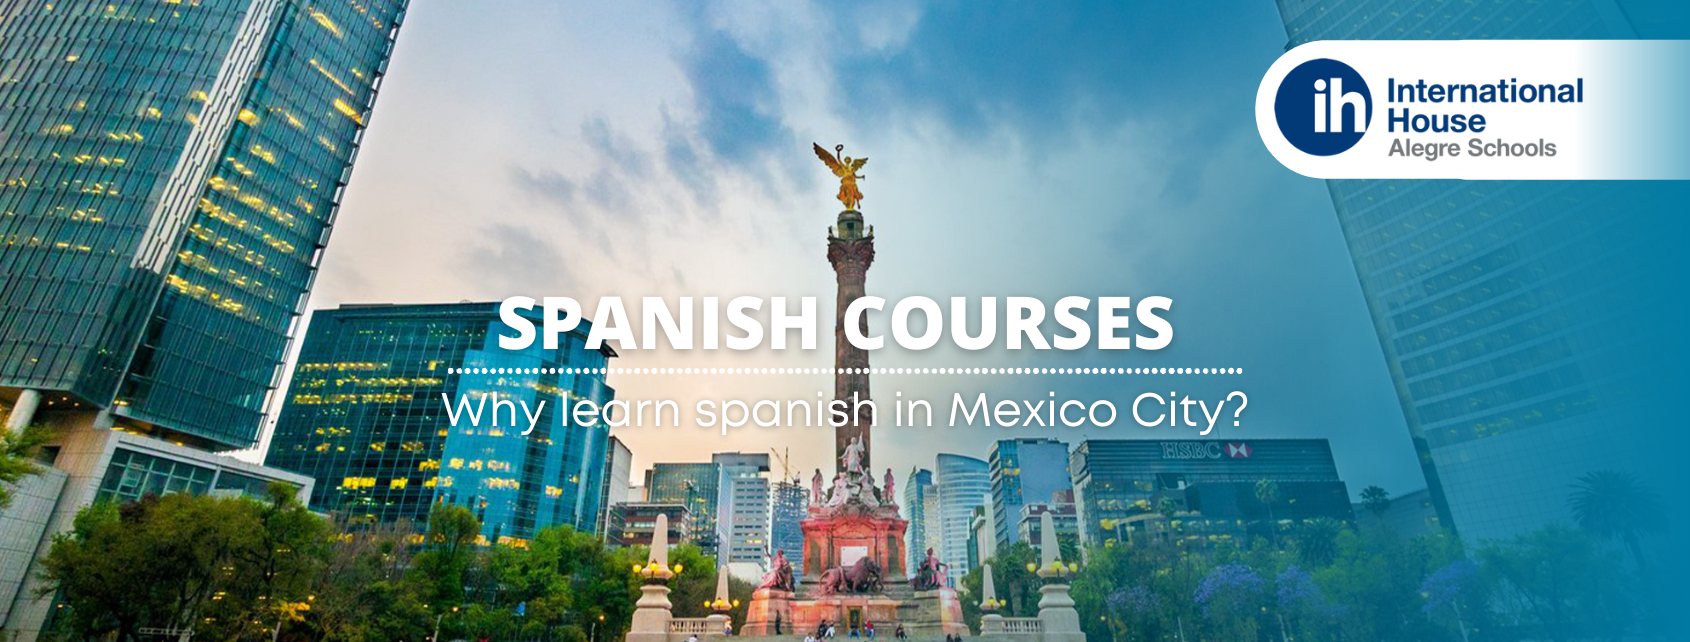 Why learn spanish in Mexico City